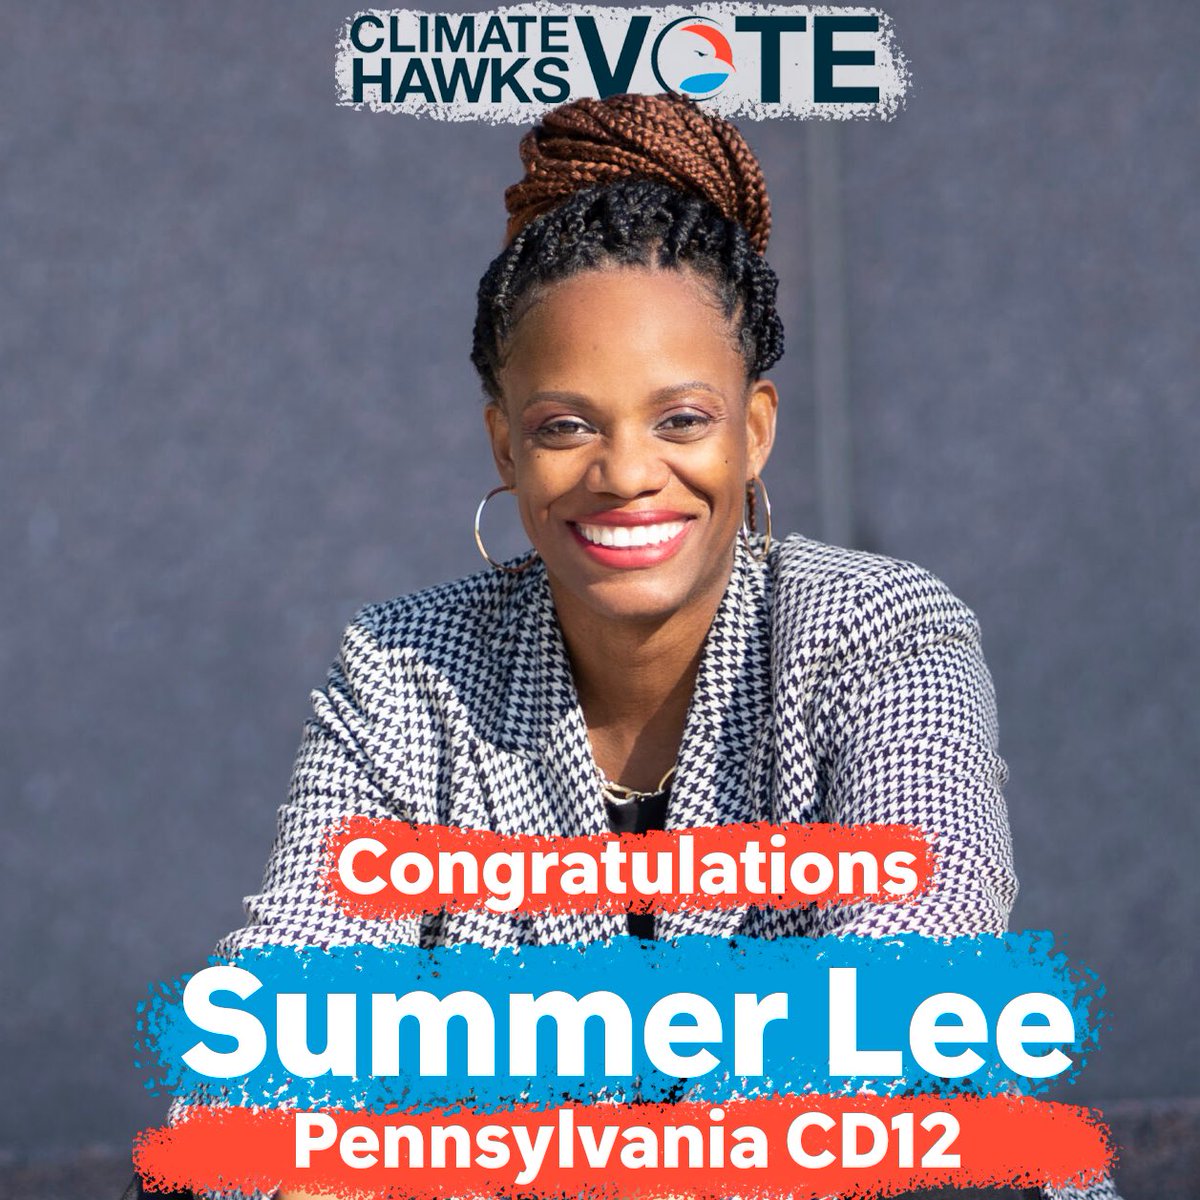 🎉 @SummerForPA has won her primary, faced down a Democratic challenger funded by Republican money, and it wasn’t even close. nytimes.com/.../results-pe…... Thanks to al the #climatehawks who showed up, made calls and more. Chip In to help us keep winning! secure.actblue.com/donate/climate…